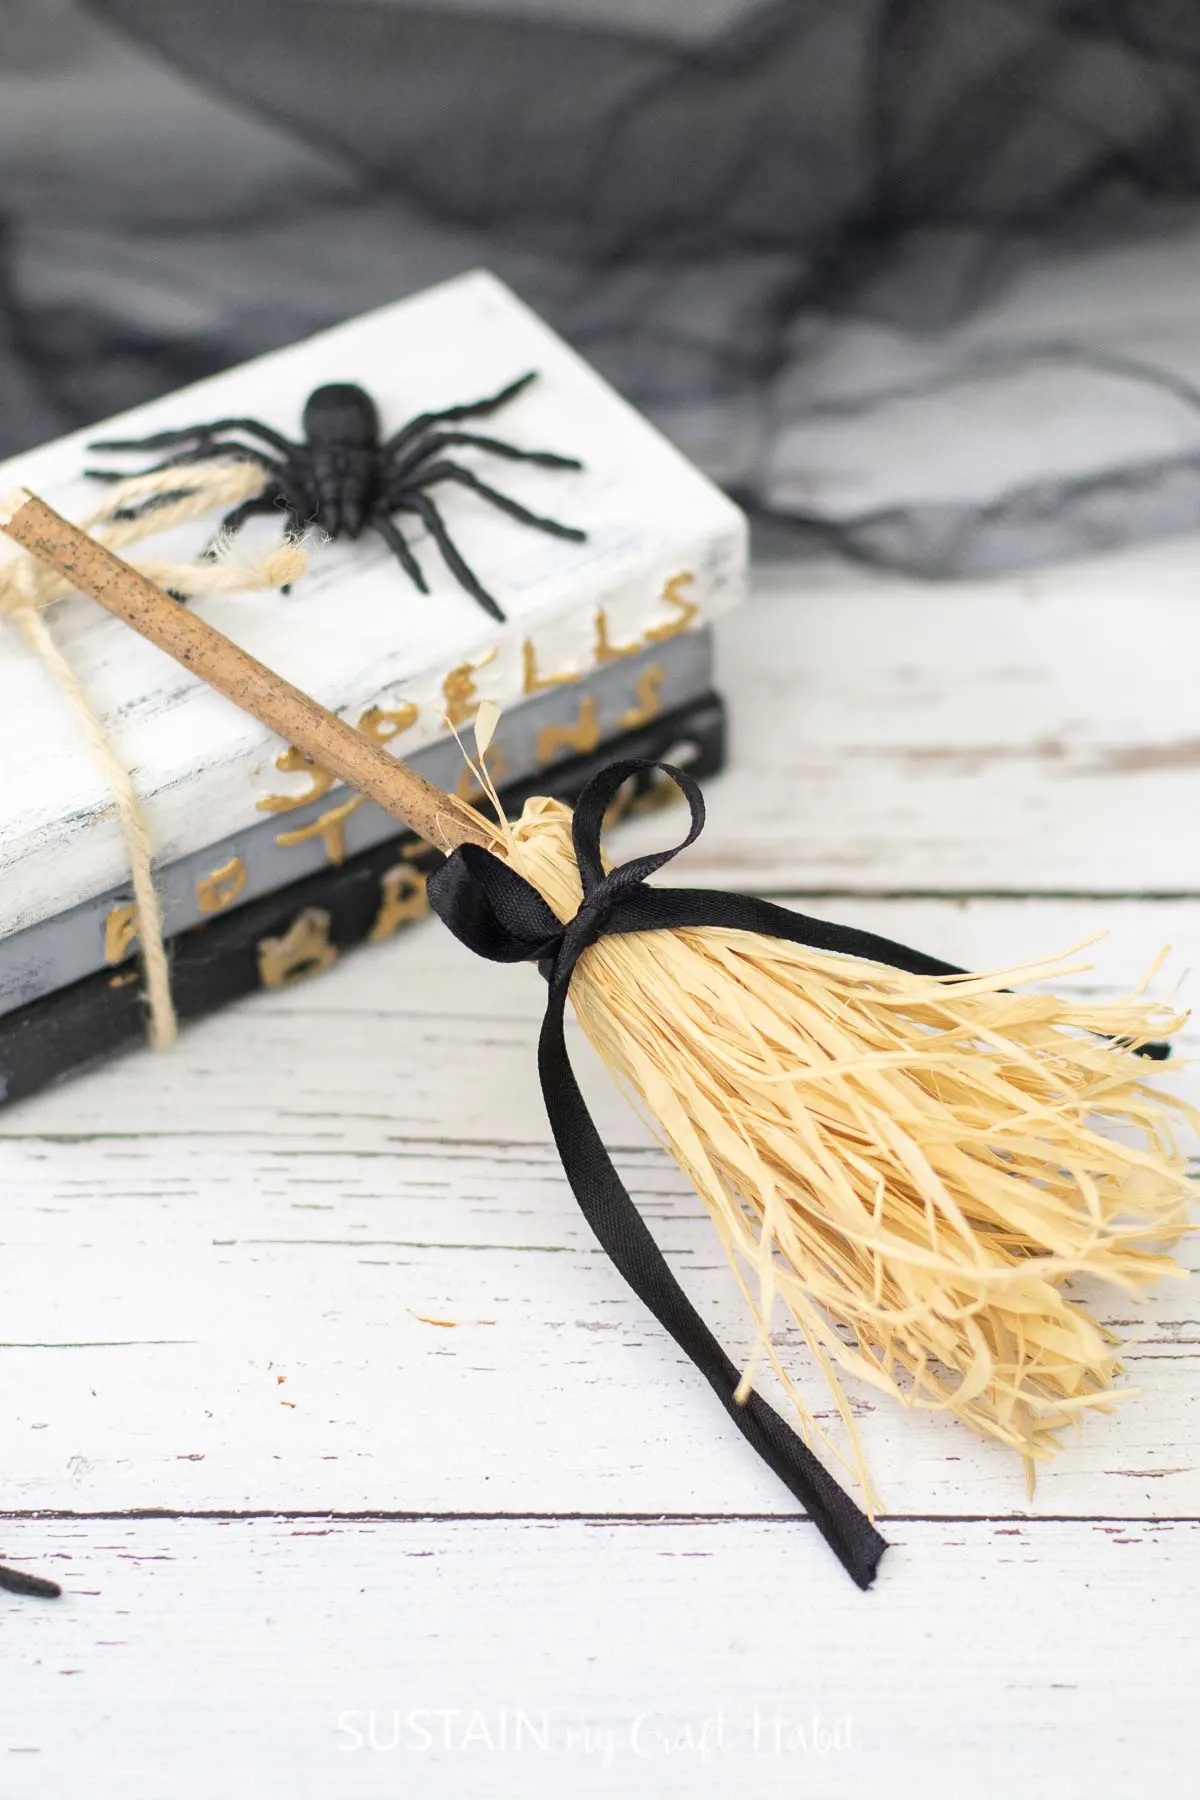 Mini witches broom leaning on stacked books with a faux spider.